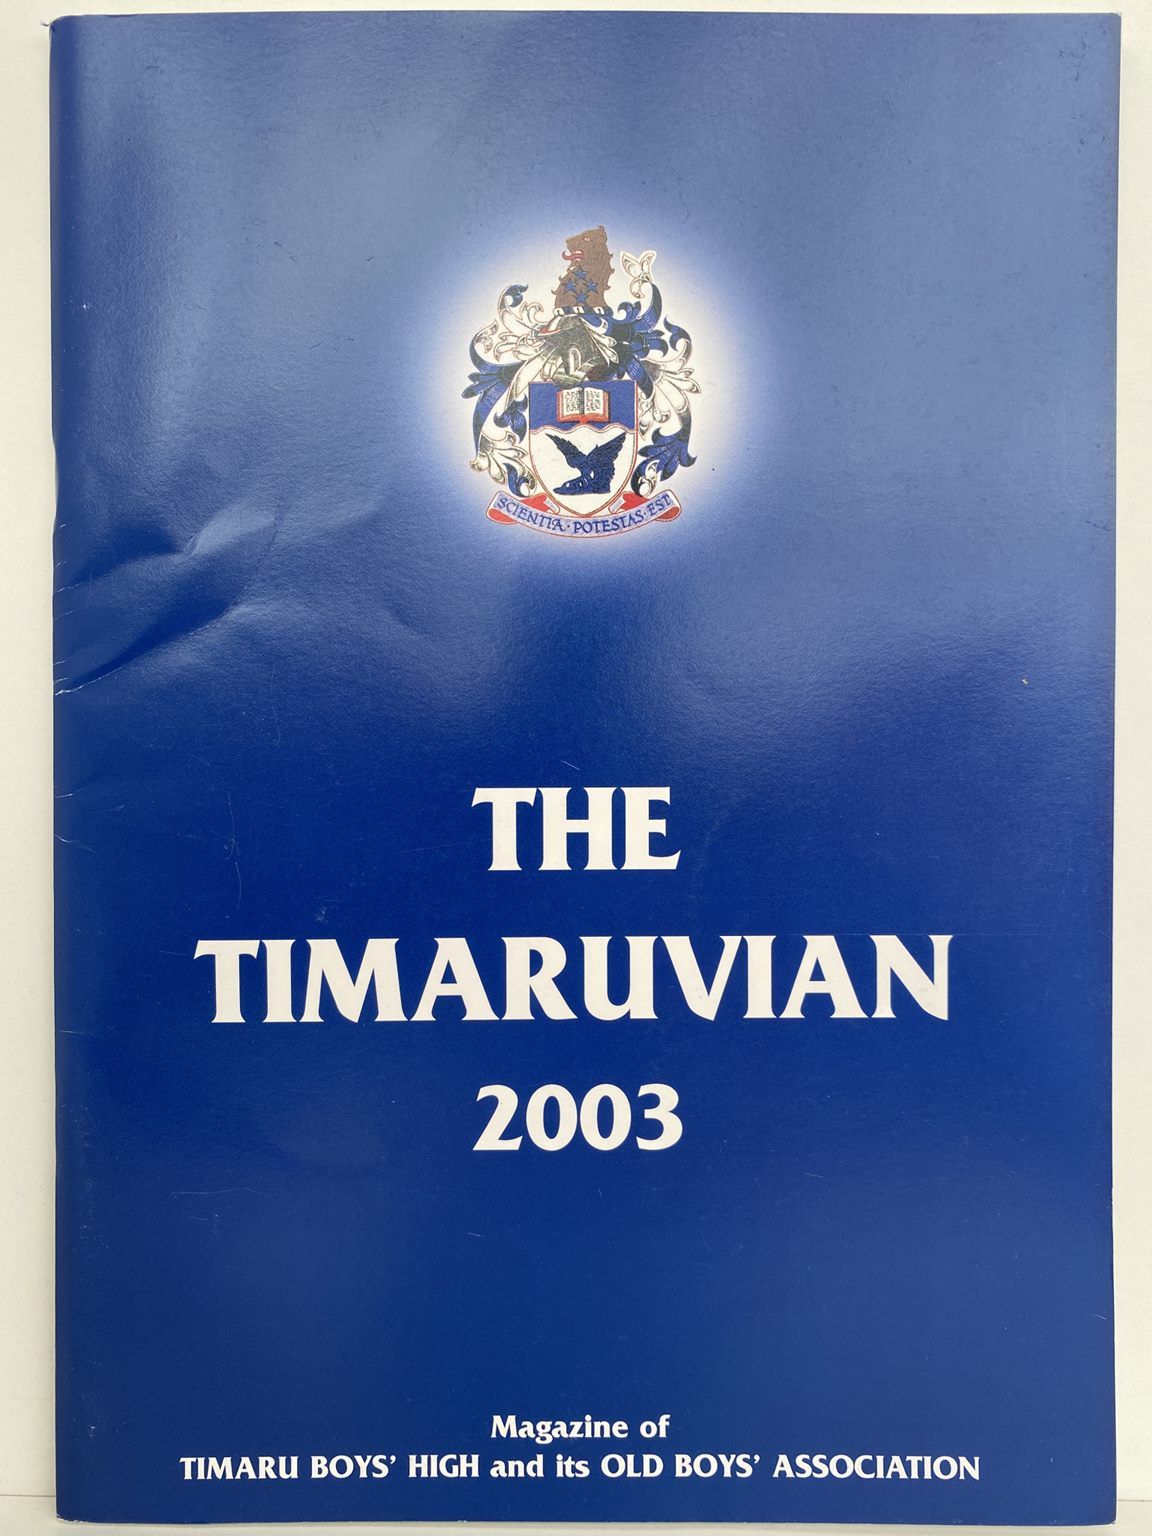 THE TIMARUVIAN: Magazine of the Timaru Boys' High School and its Old Boys' Association 2003